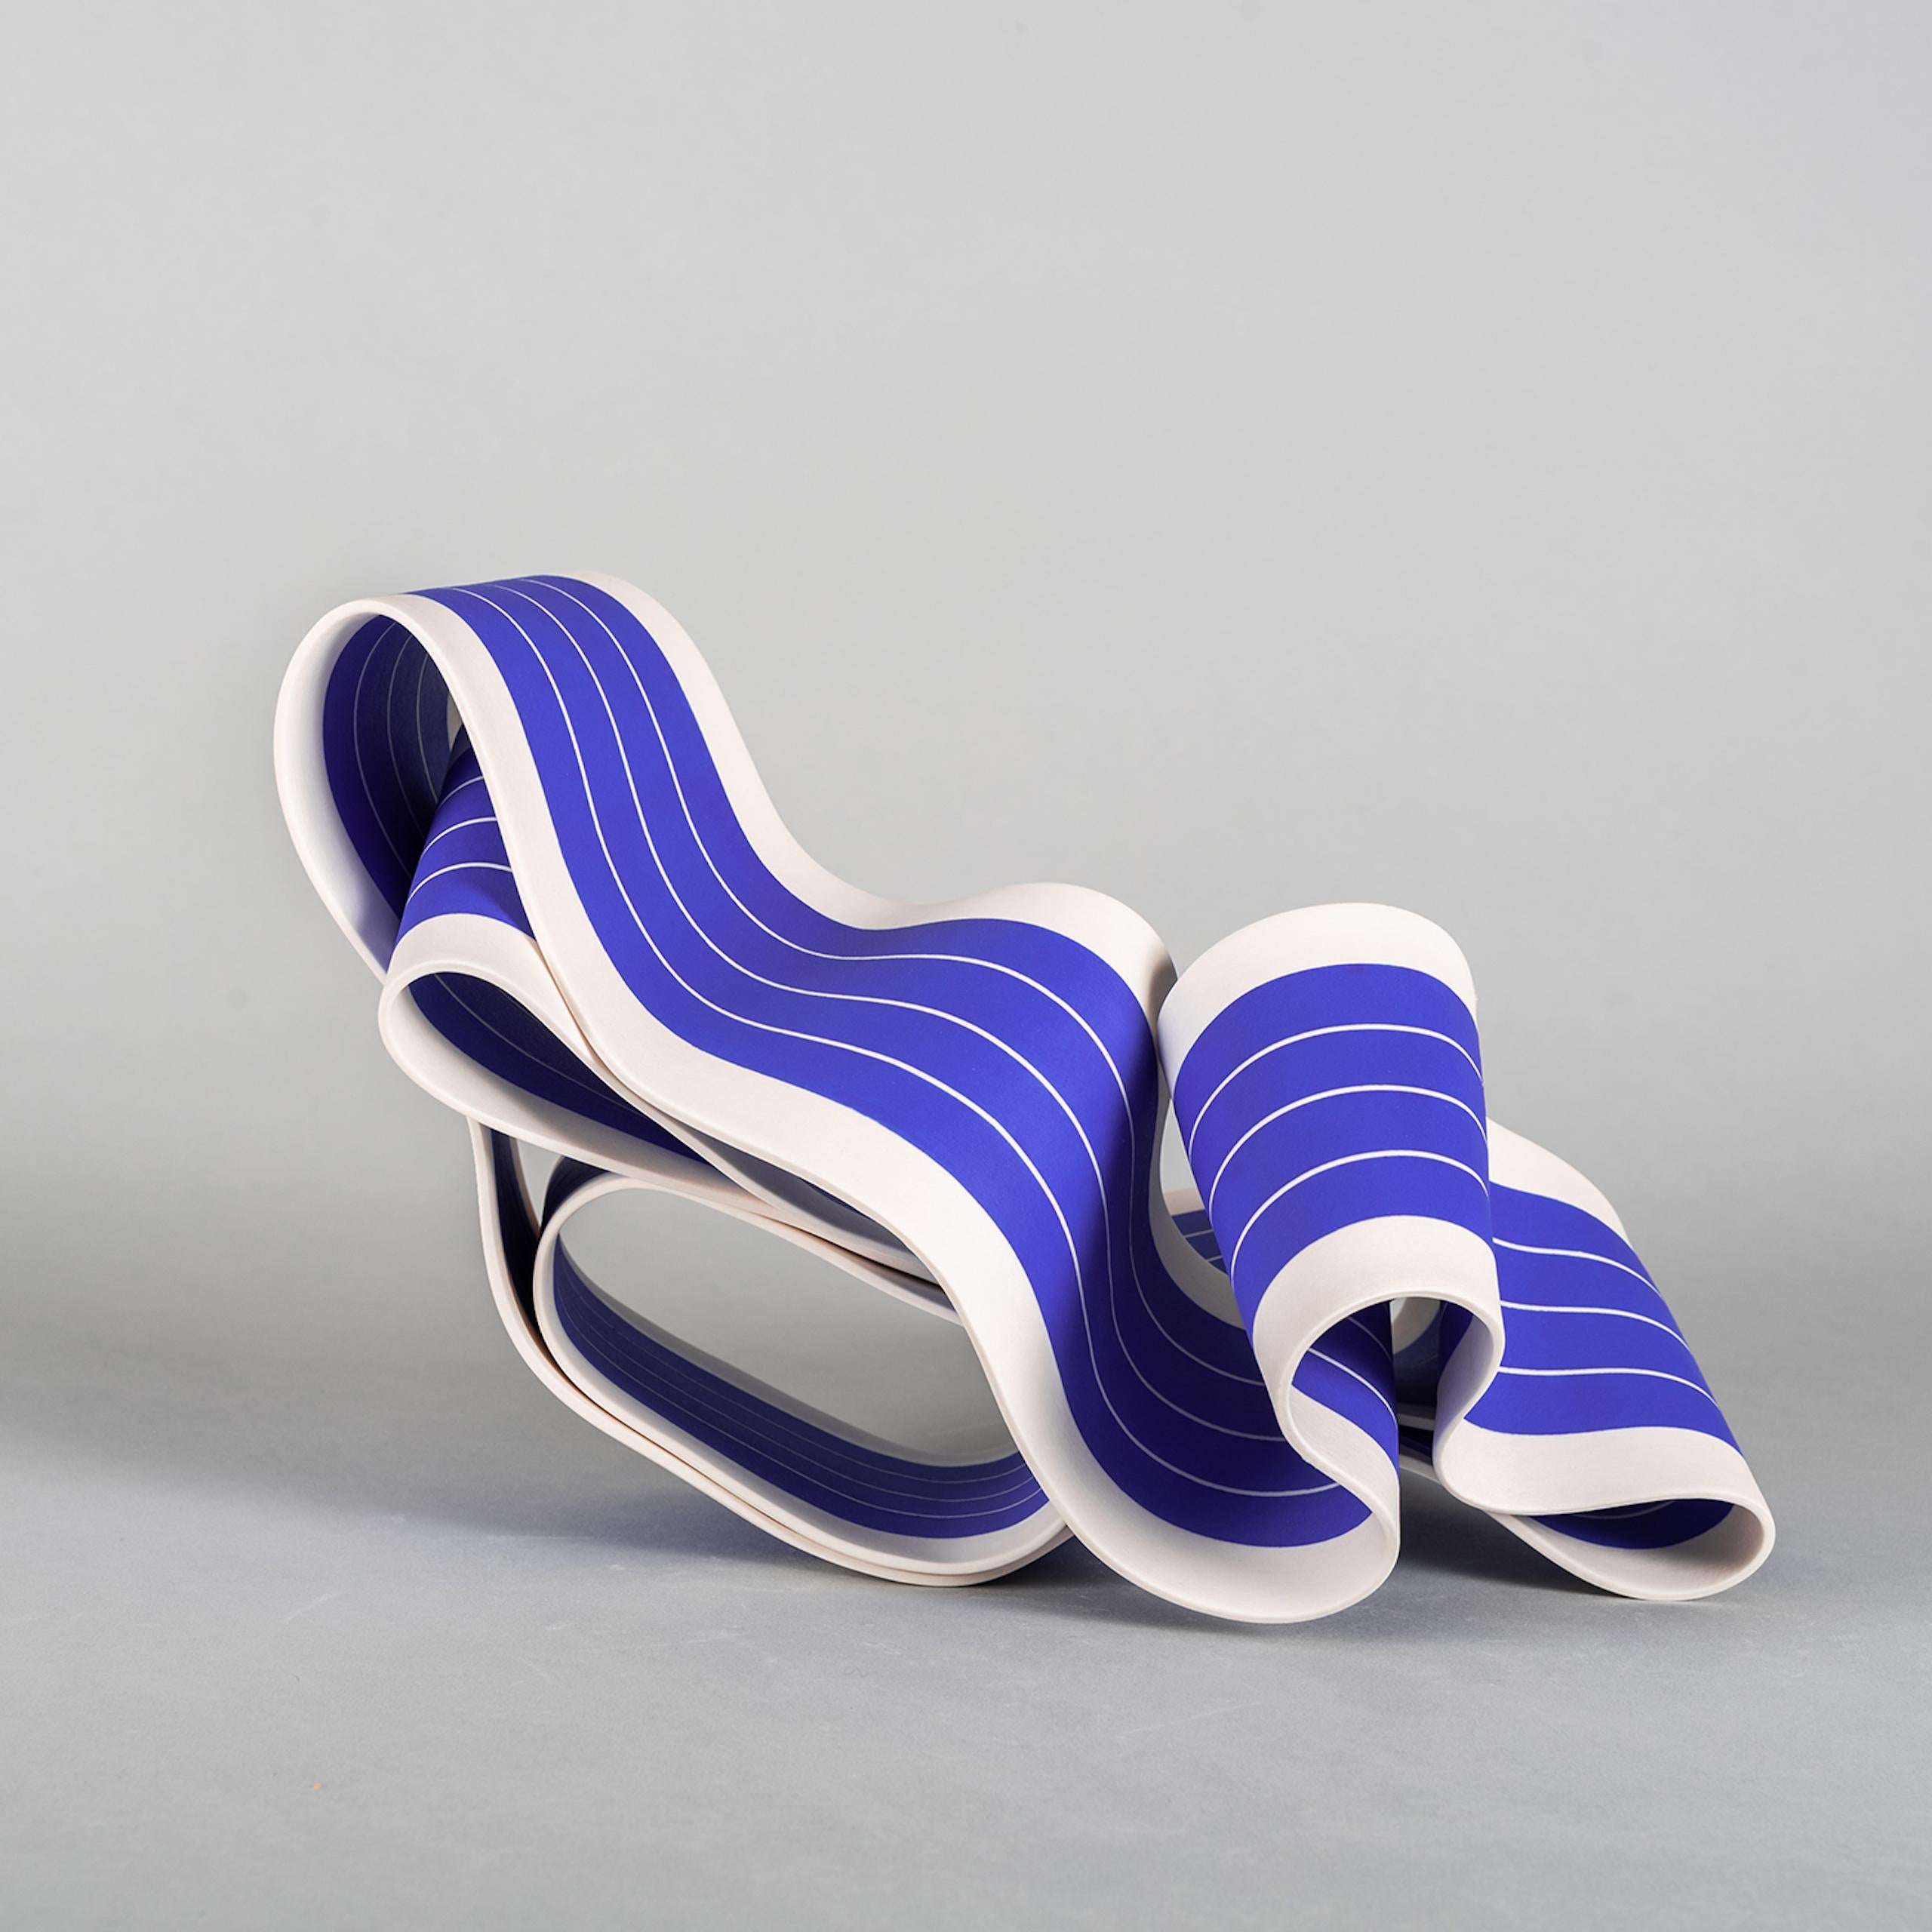 Folding in Motion 2 by Simcha Even-Chen - Porcelain sculpture, blue, white, line For Sale 2